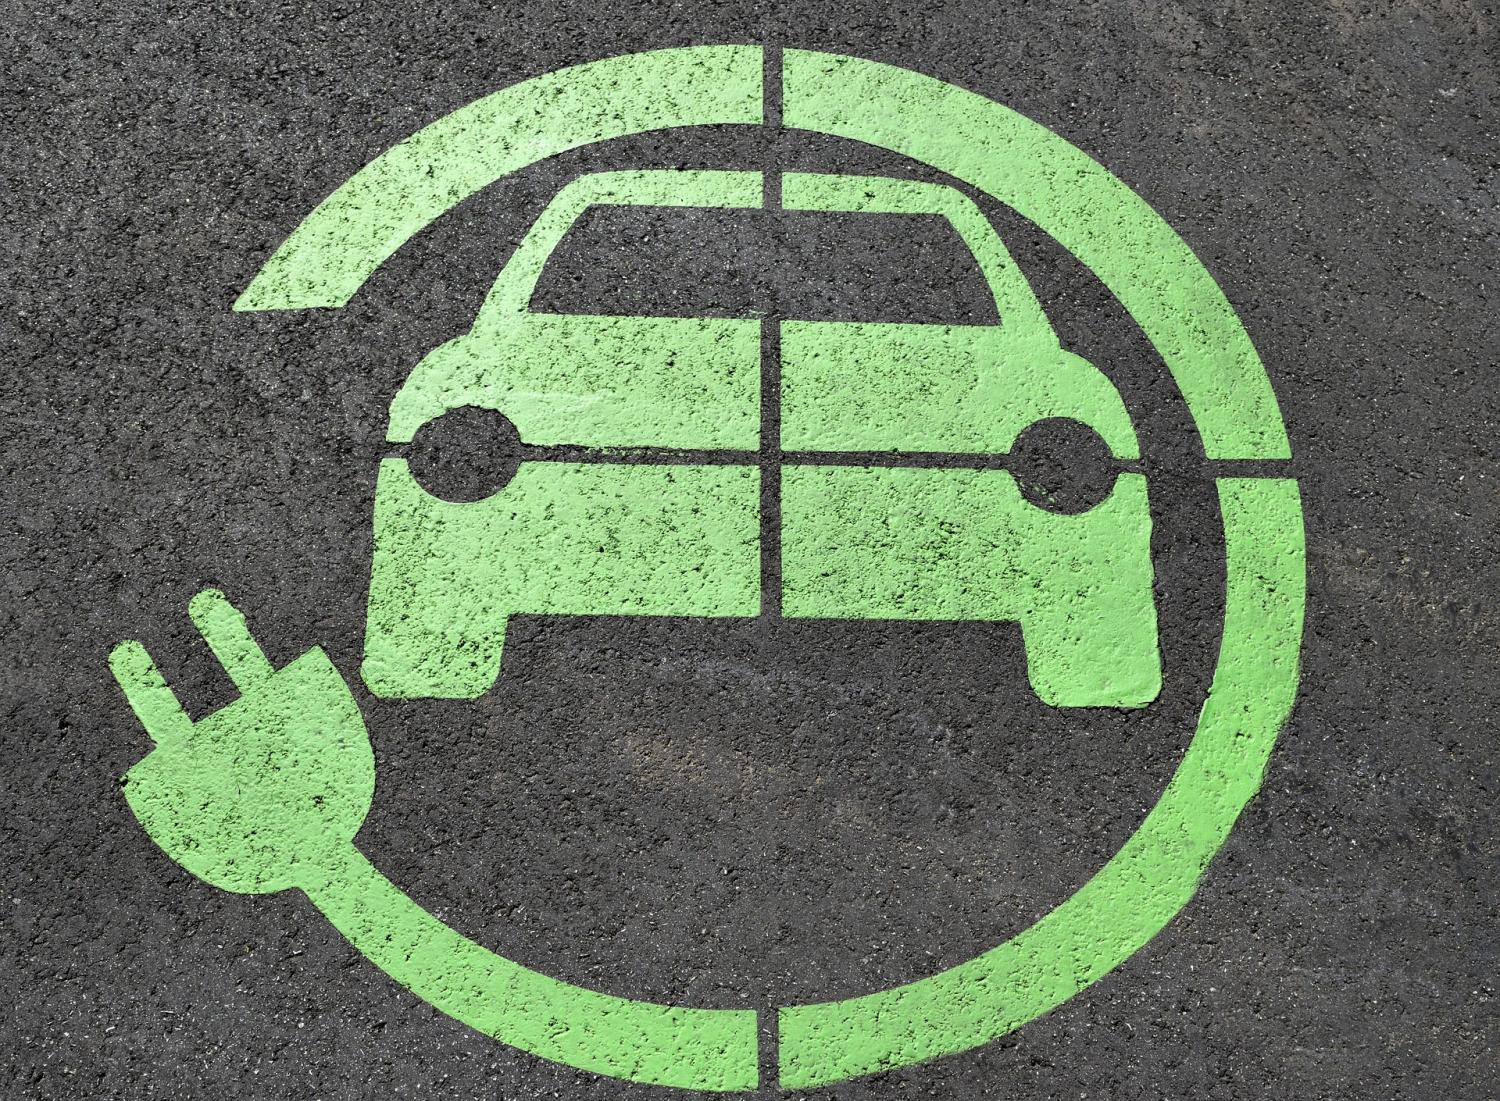 New incentives could electrify the car market, but old roadblocks remain